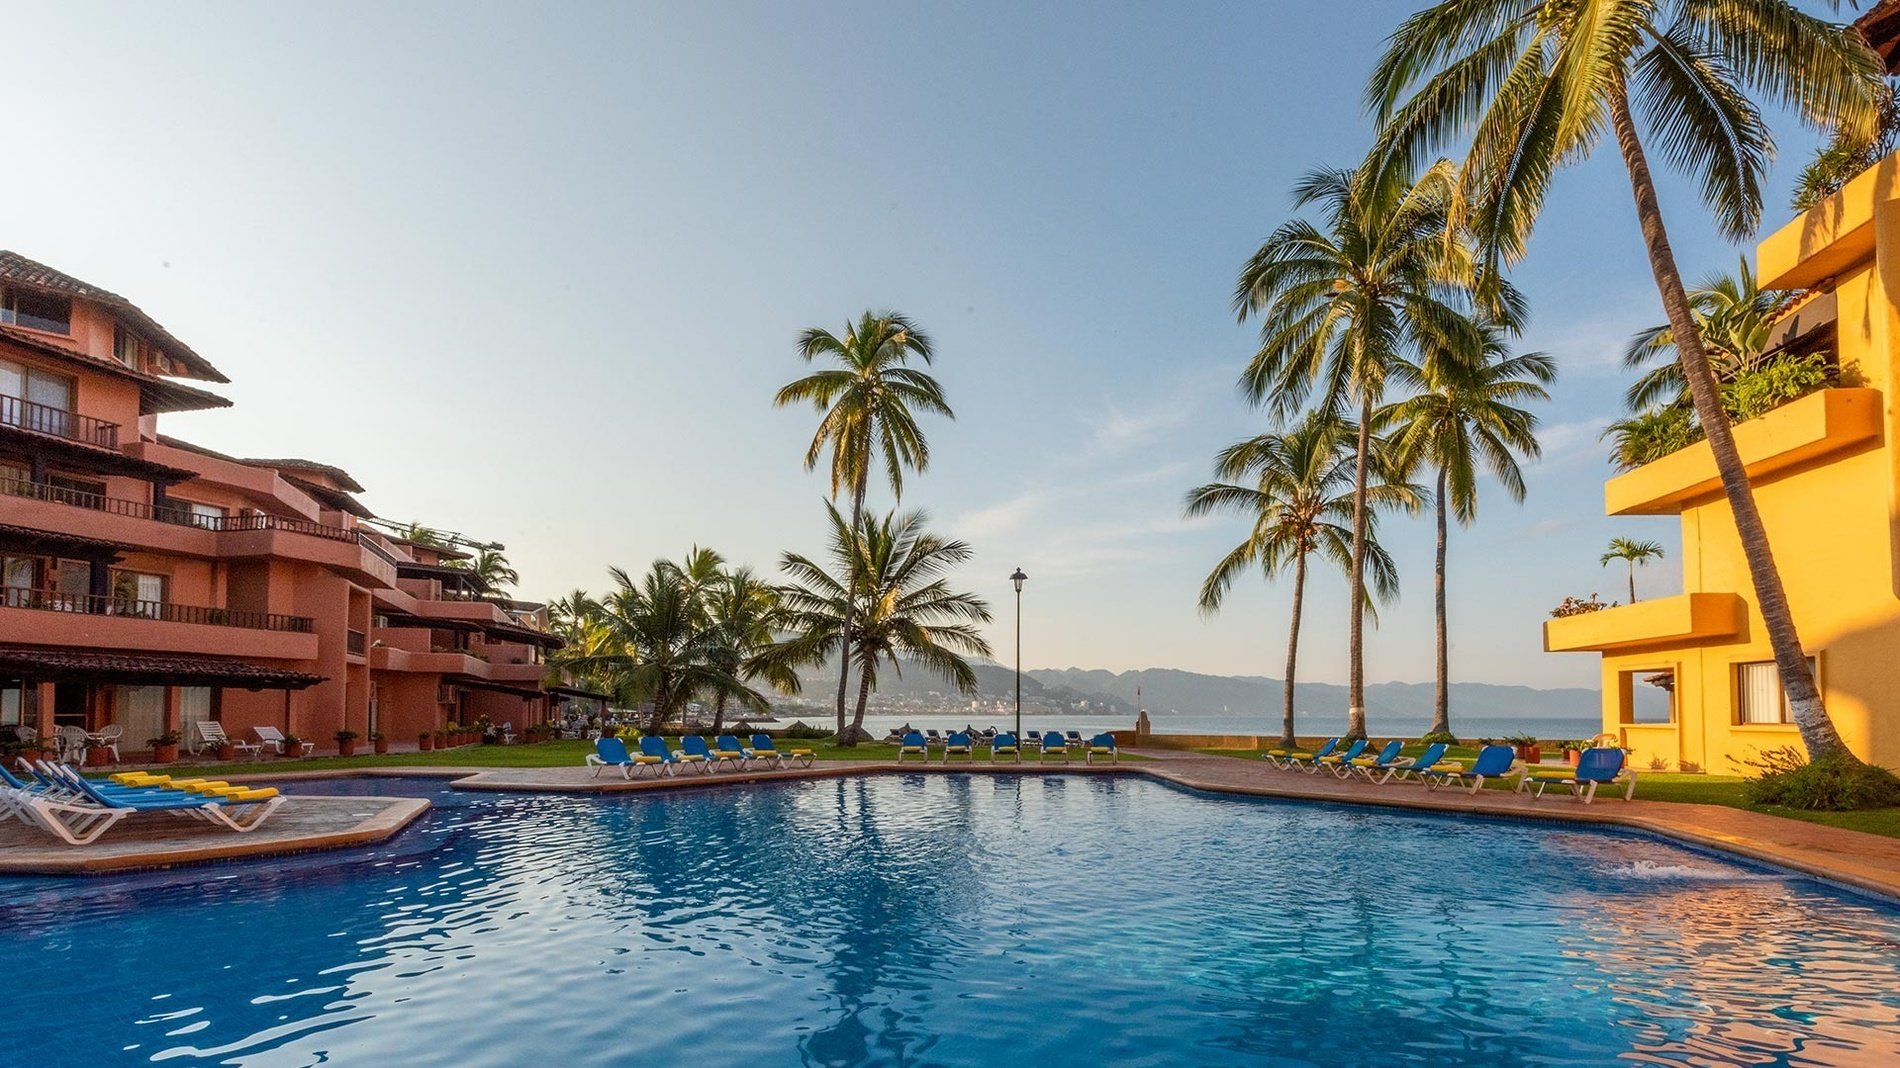 Views from the hotel to the beaches of Puerto Vallarta